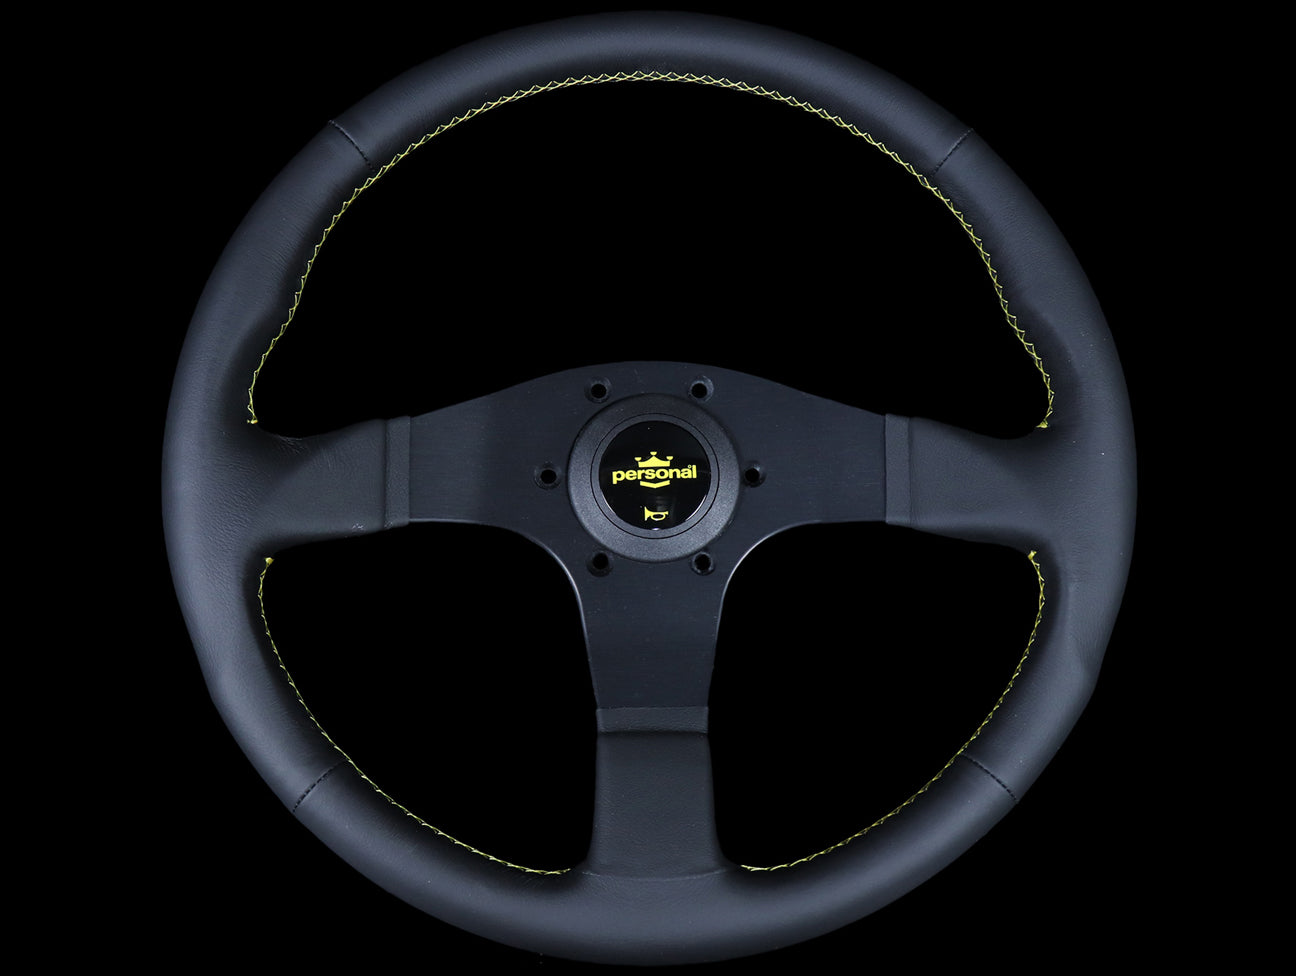 Personal Neo Actis 340mm Steering Wheel - Black Leather / Yellow Stitch